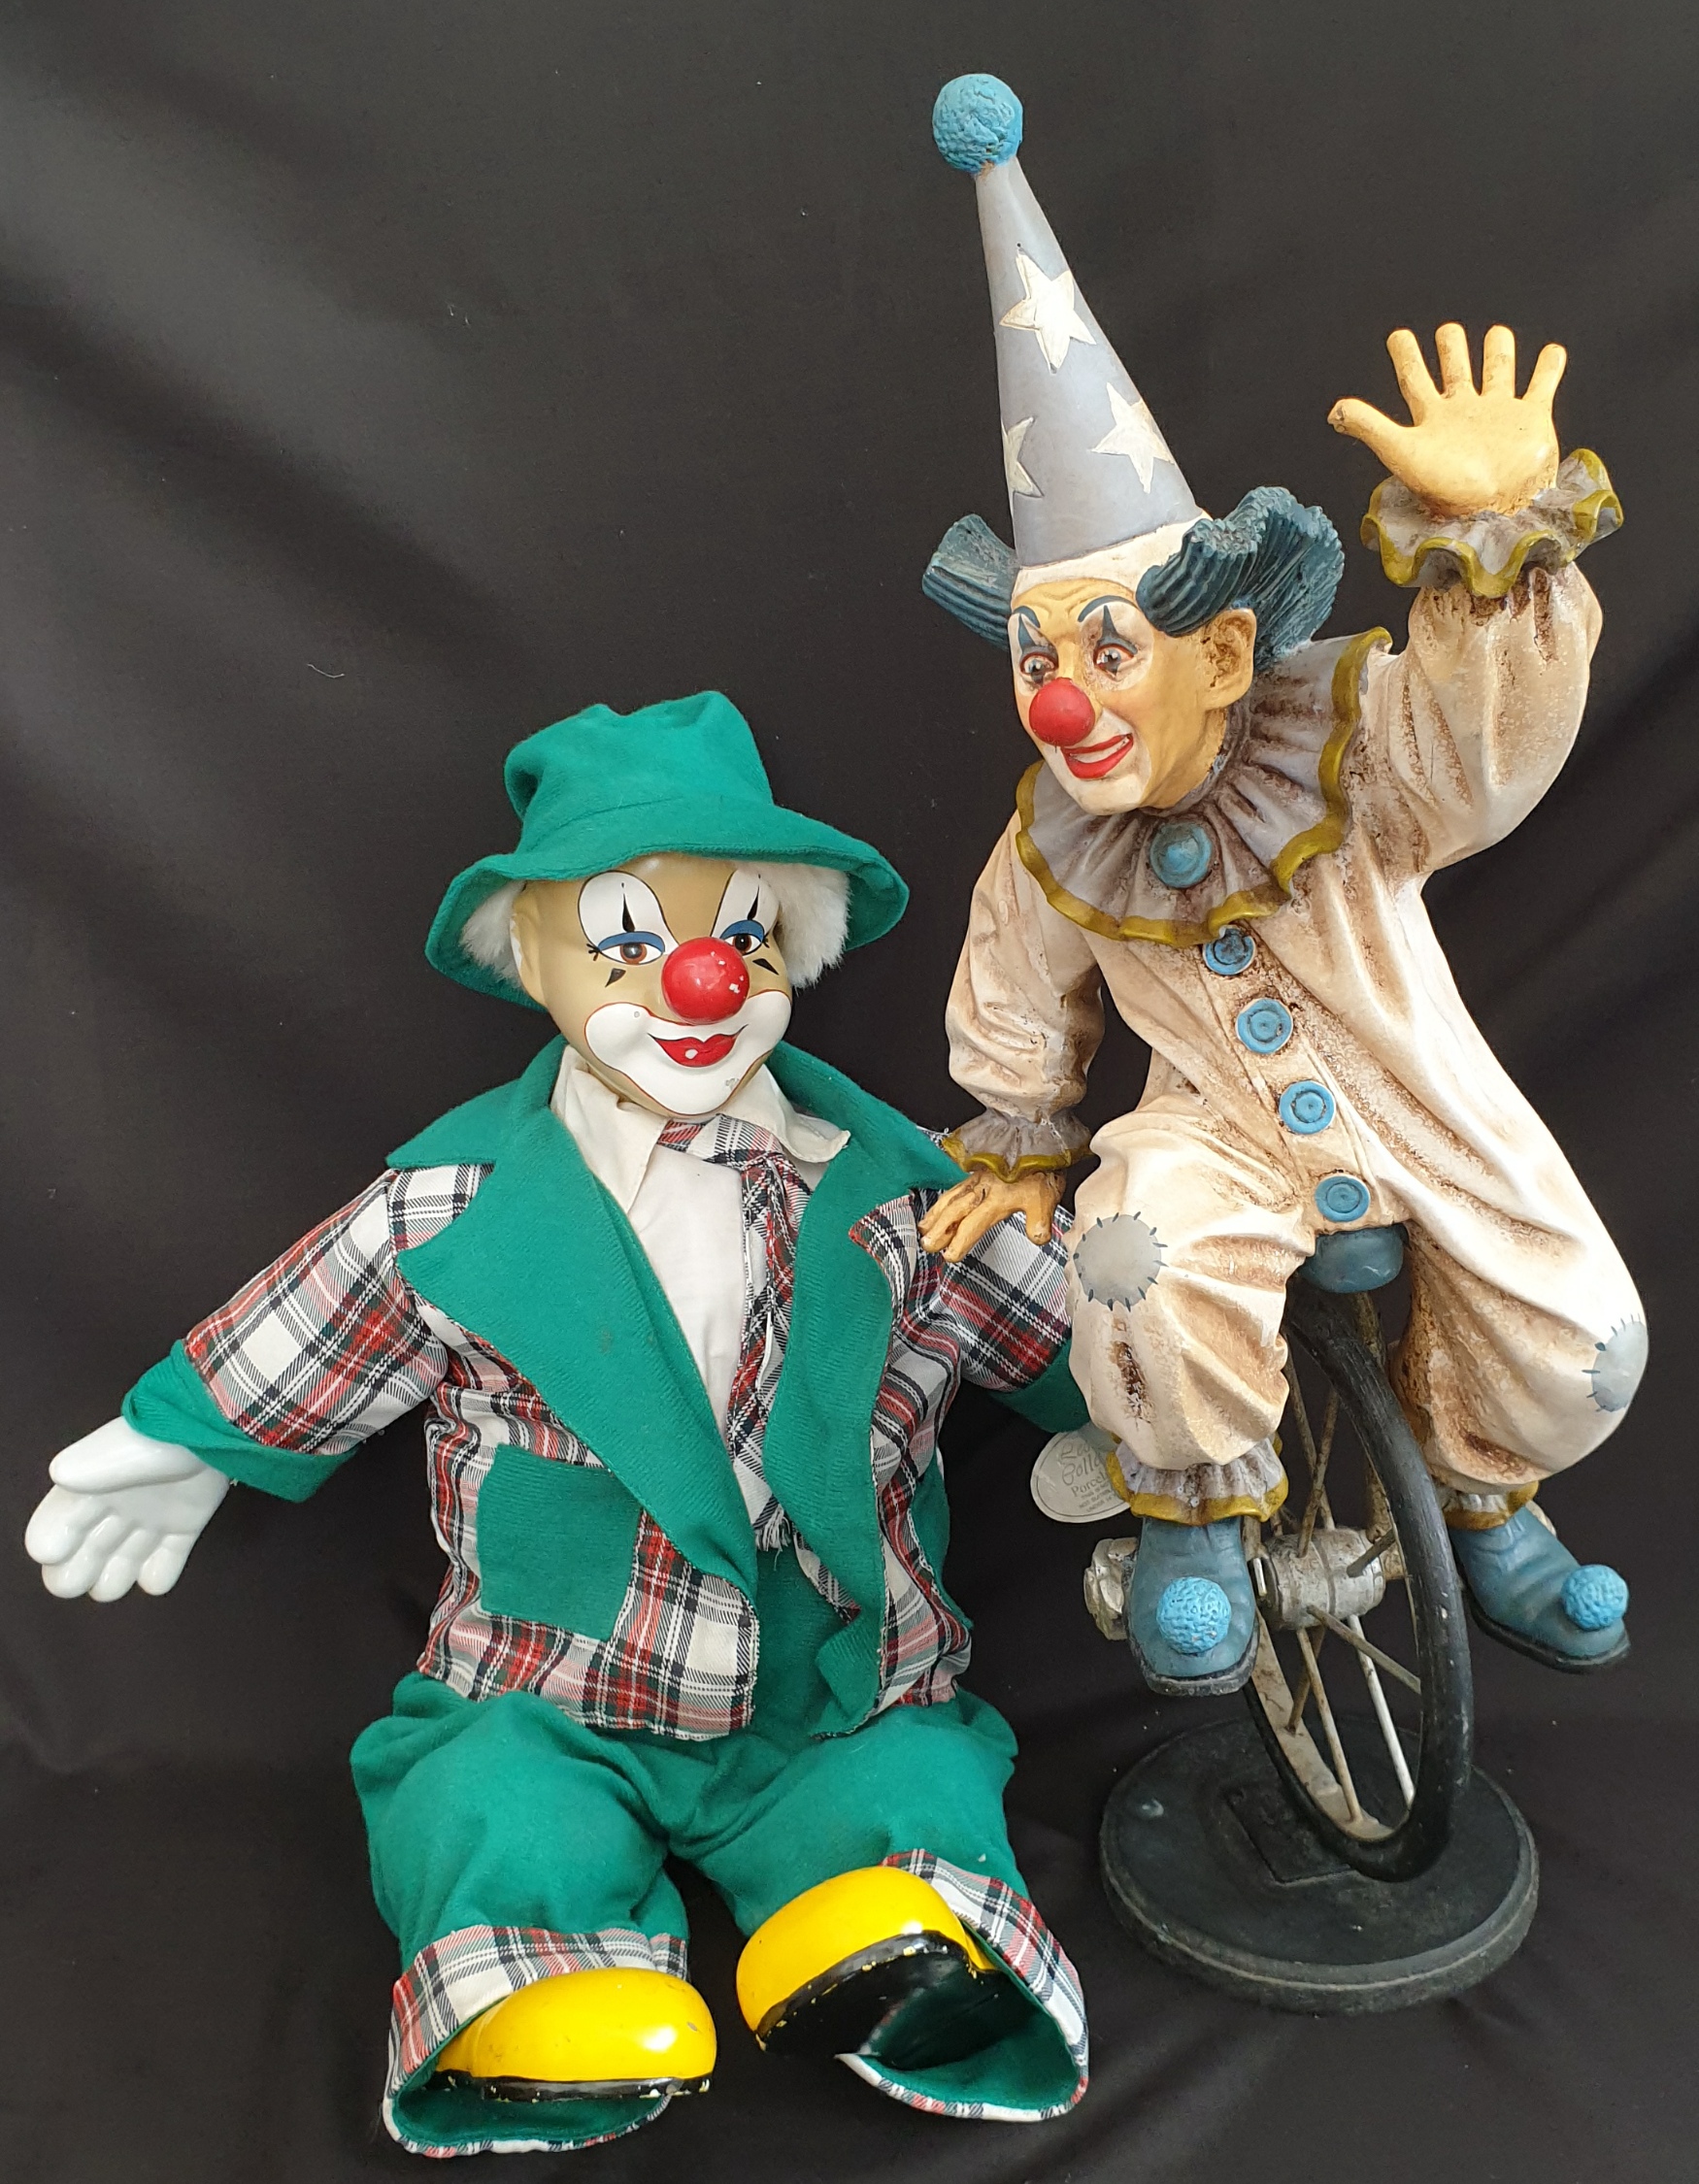 Vintage Collectable Model Clown One on A Mono Cycle